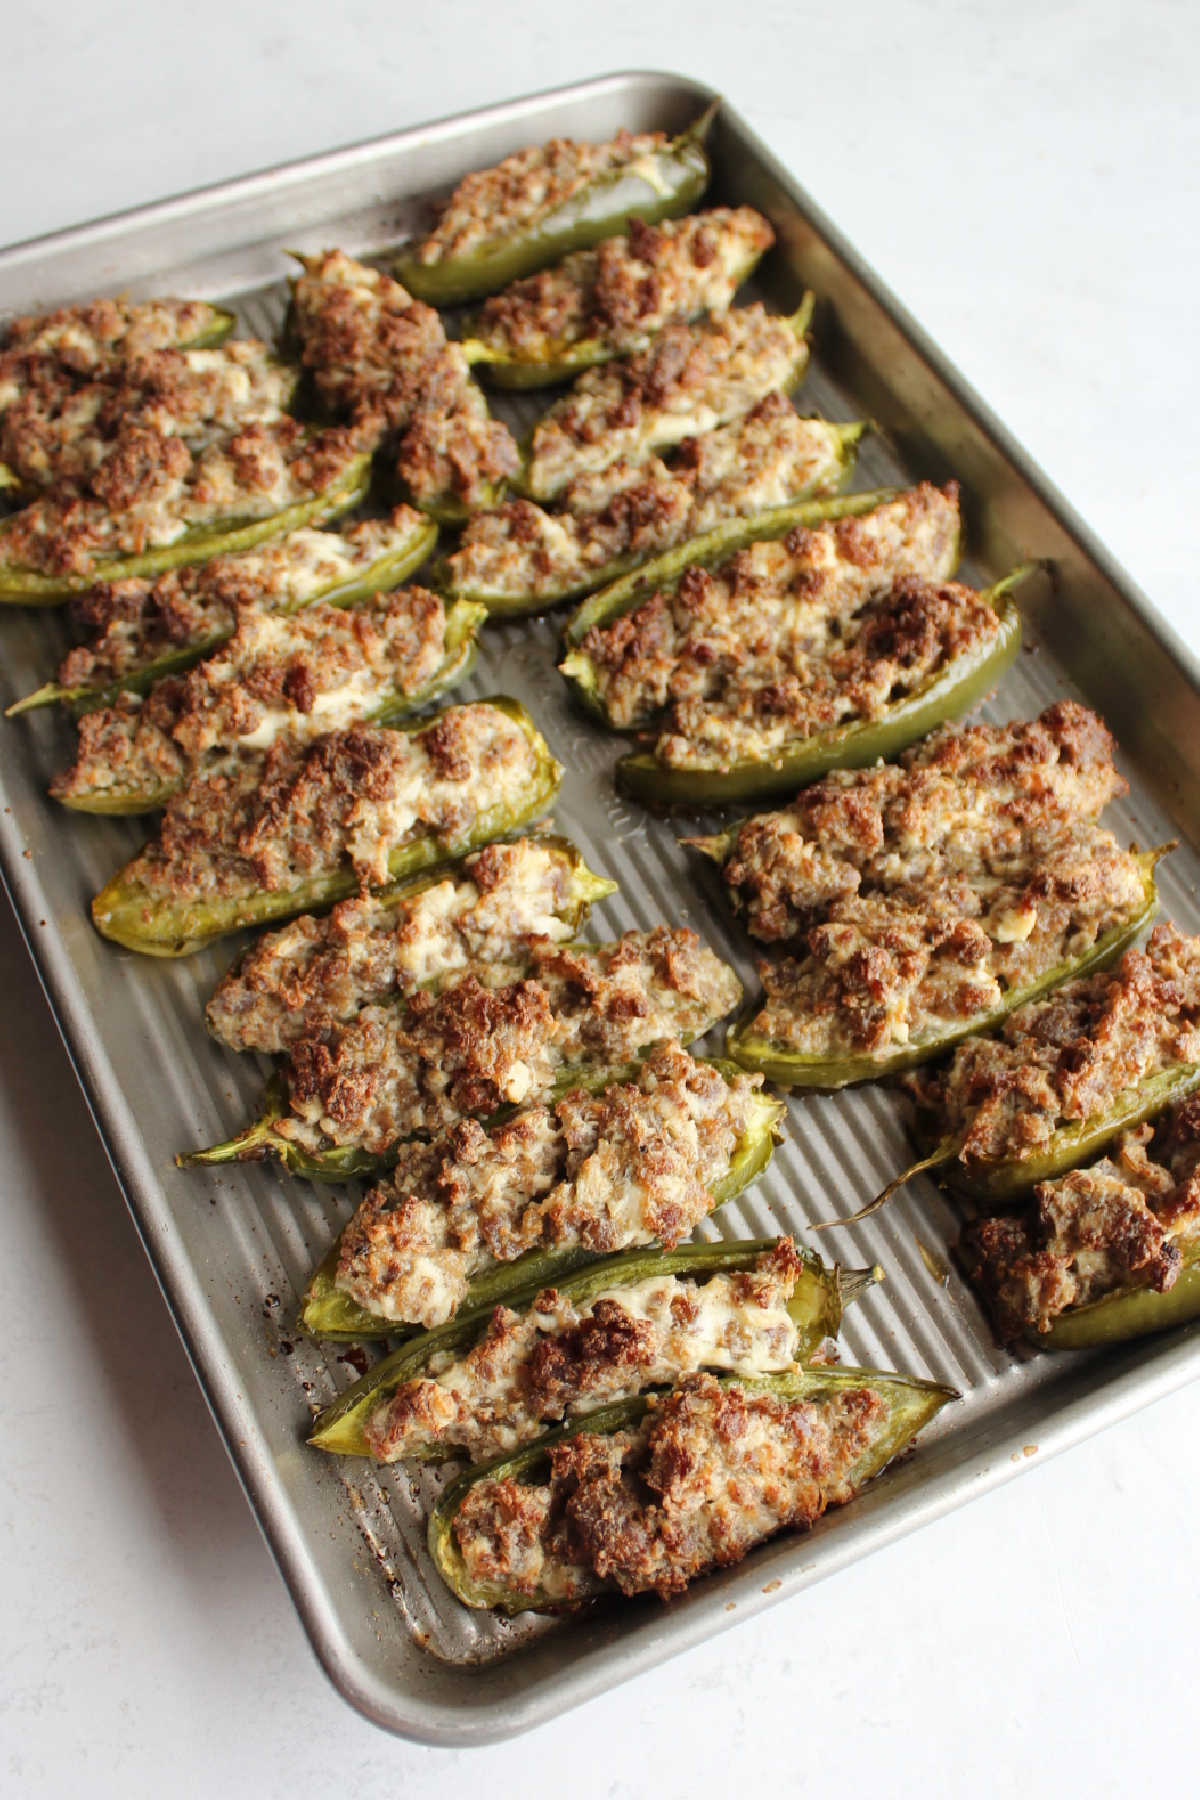 Tray of sausage stuffed jalapeno poppers with golden brown tops fresh from the oven.